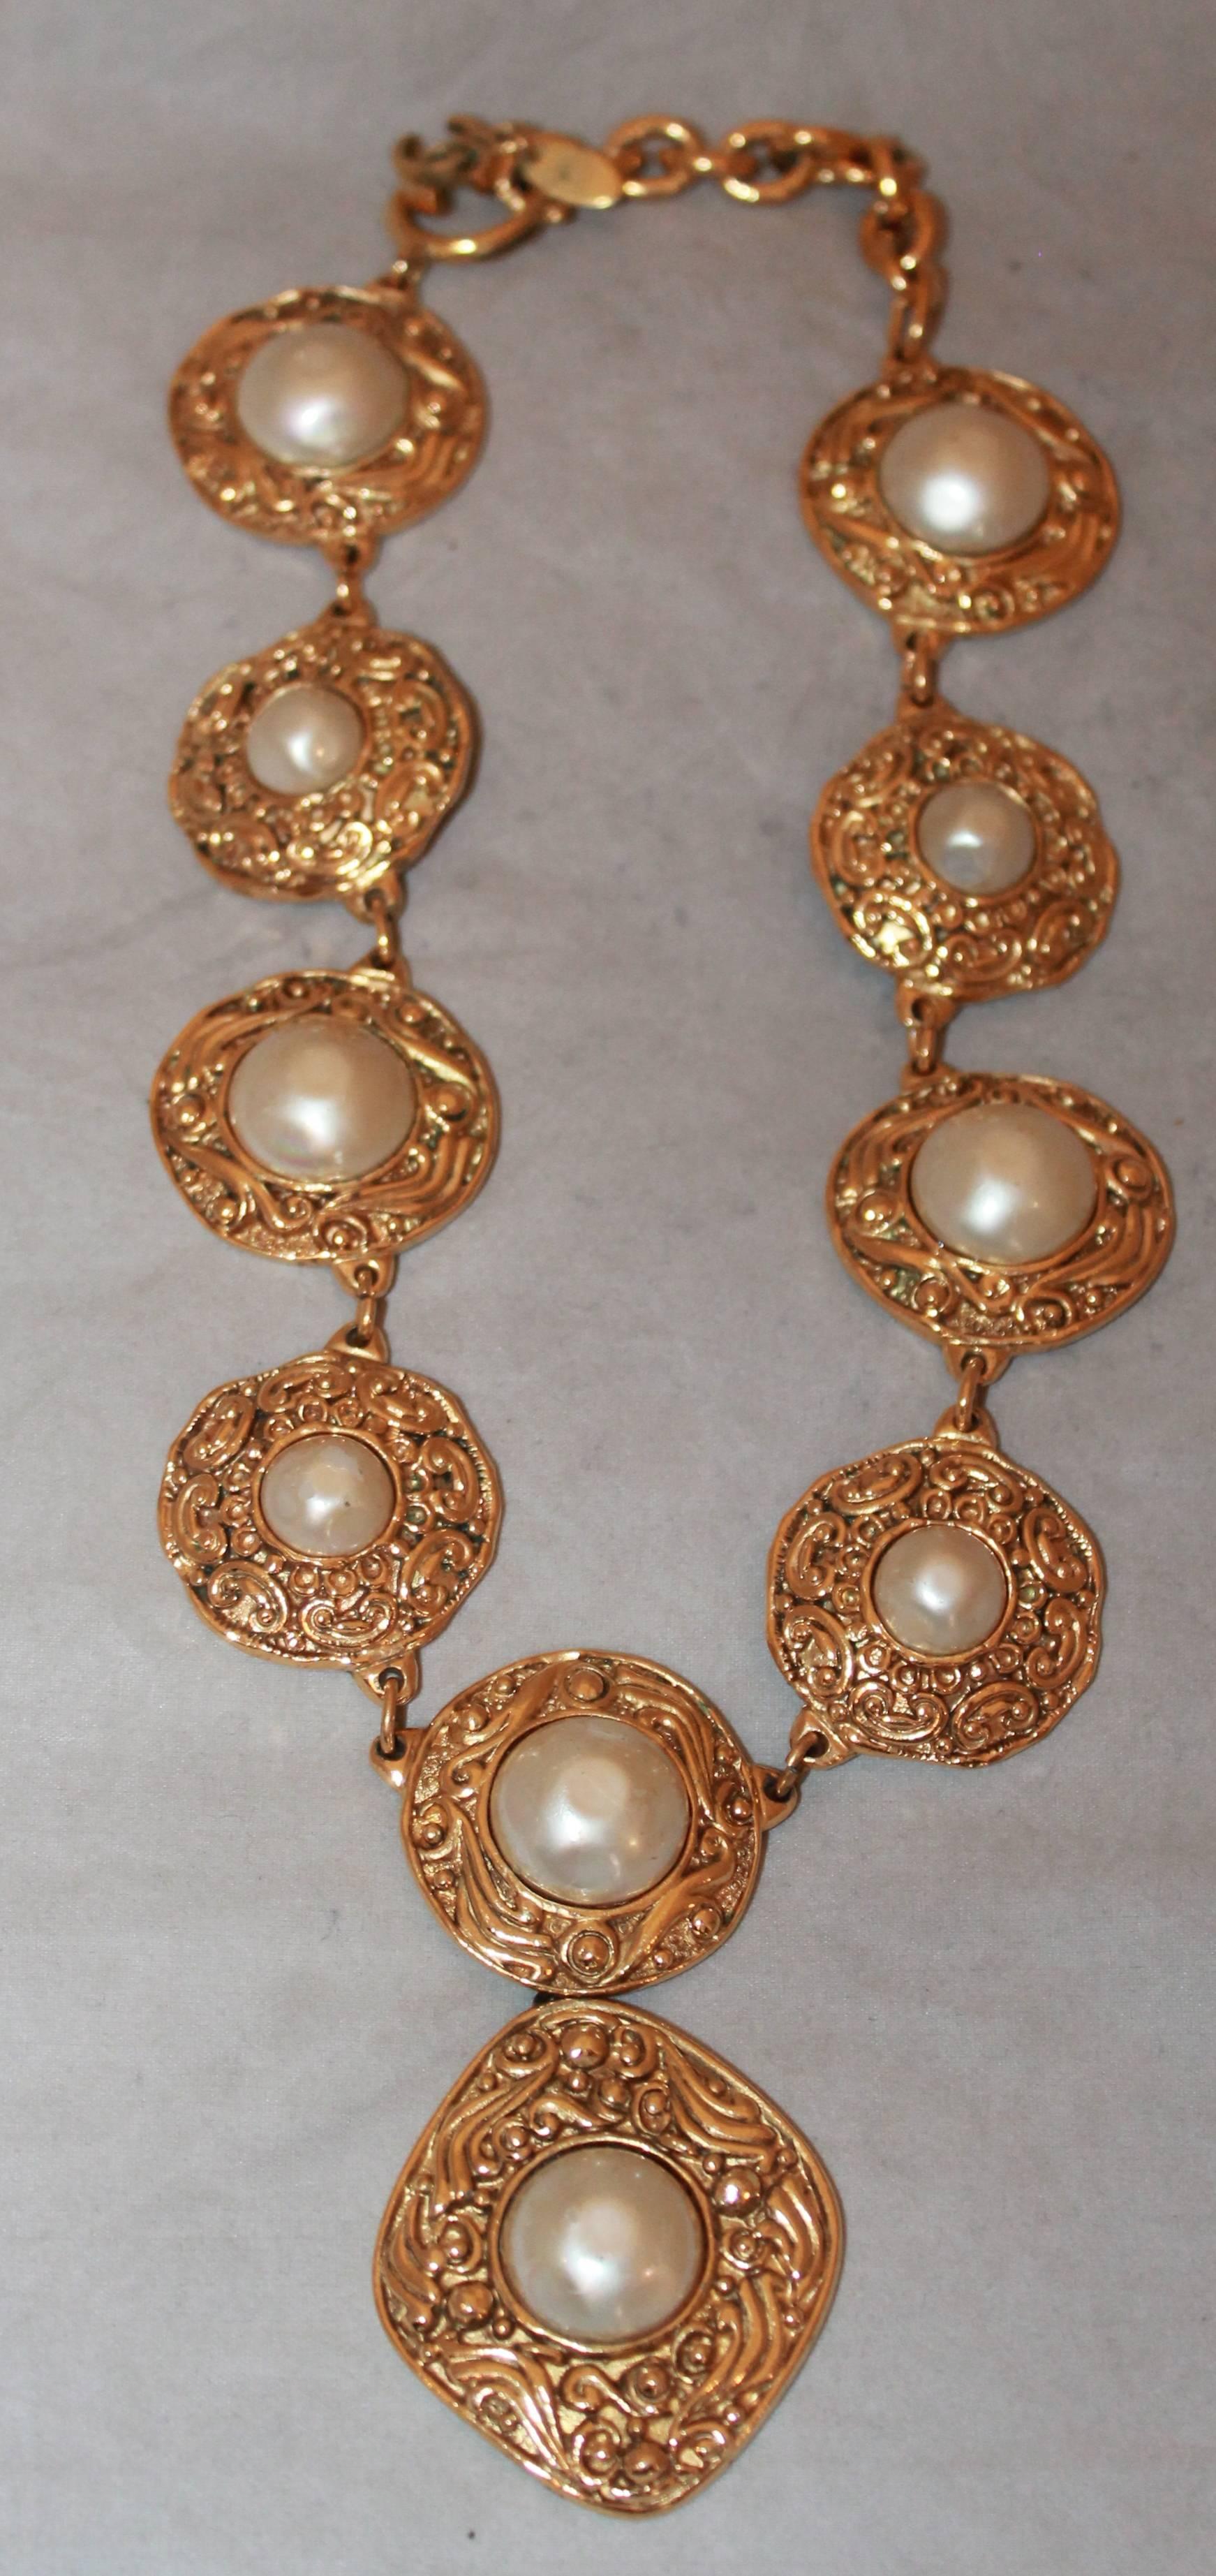 Chanel 1970's Goldtone & Pearl Medallion Necklace.  This stunning Chanel necklace is in excellent vintage condition.  It features ten medallion pieces, with the bottom most one having a more rounded diamond shape.  This piece is from the late